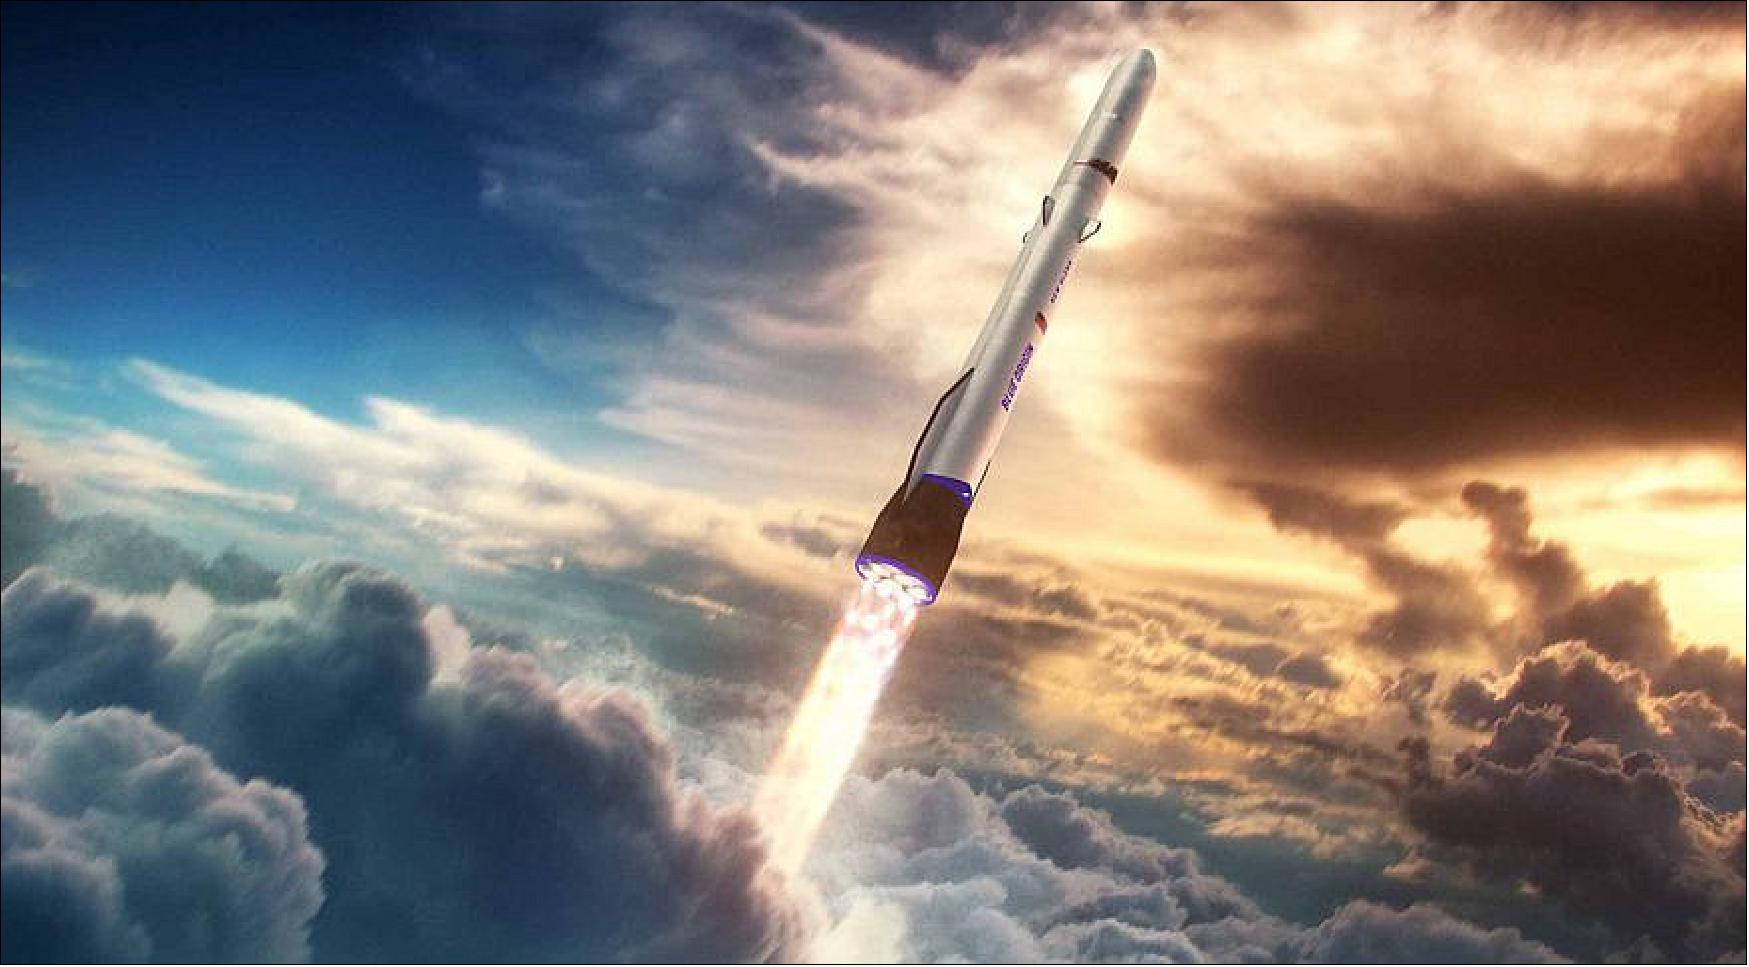 Figure 6: A first launch of Blue Origin’s New Glenn rocket may slip past the end of 2022, a company official said Dec. 13 (image credit: Blue Origin)